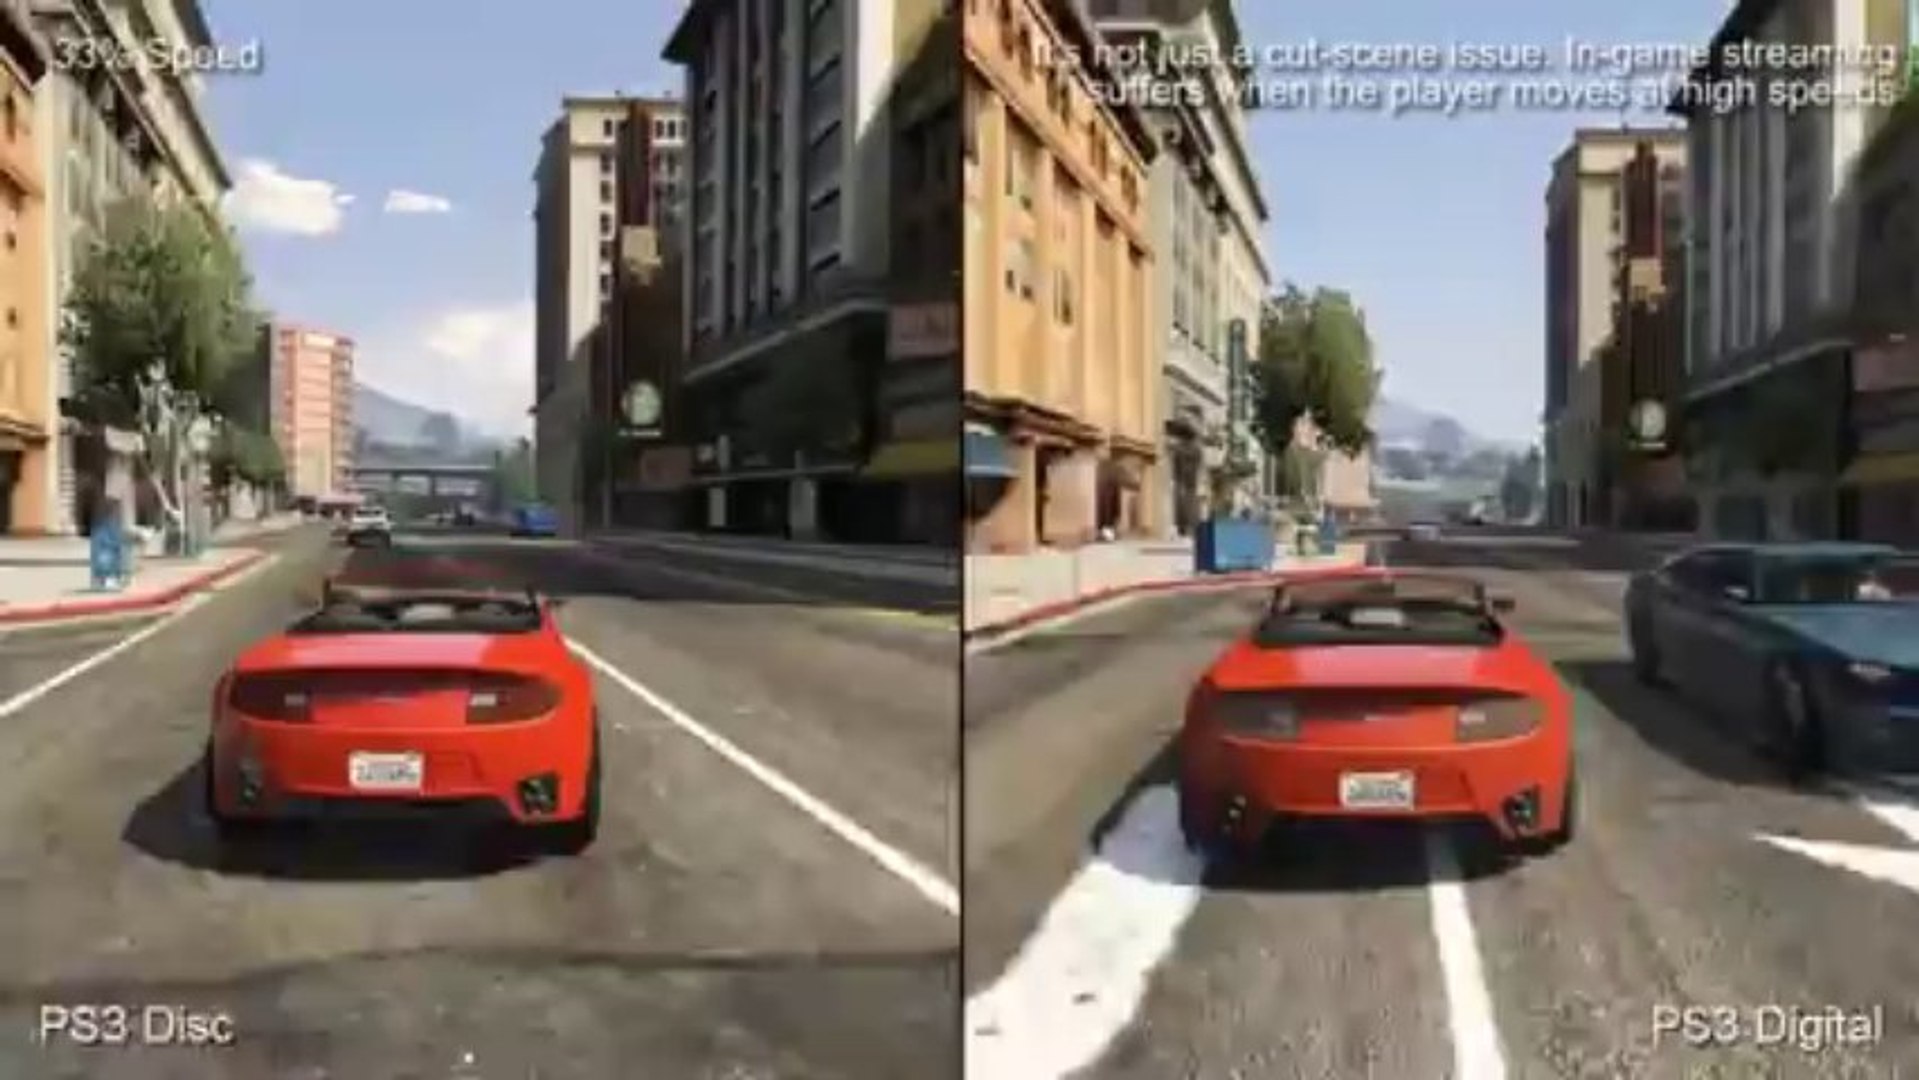 Syndicaat George Stevenson George Eliot Grand Theft Auto V - Digital PS3 Version VS Disc PS3 Version - video  Dailymotion